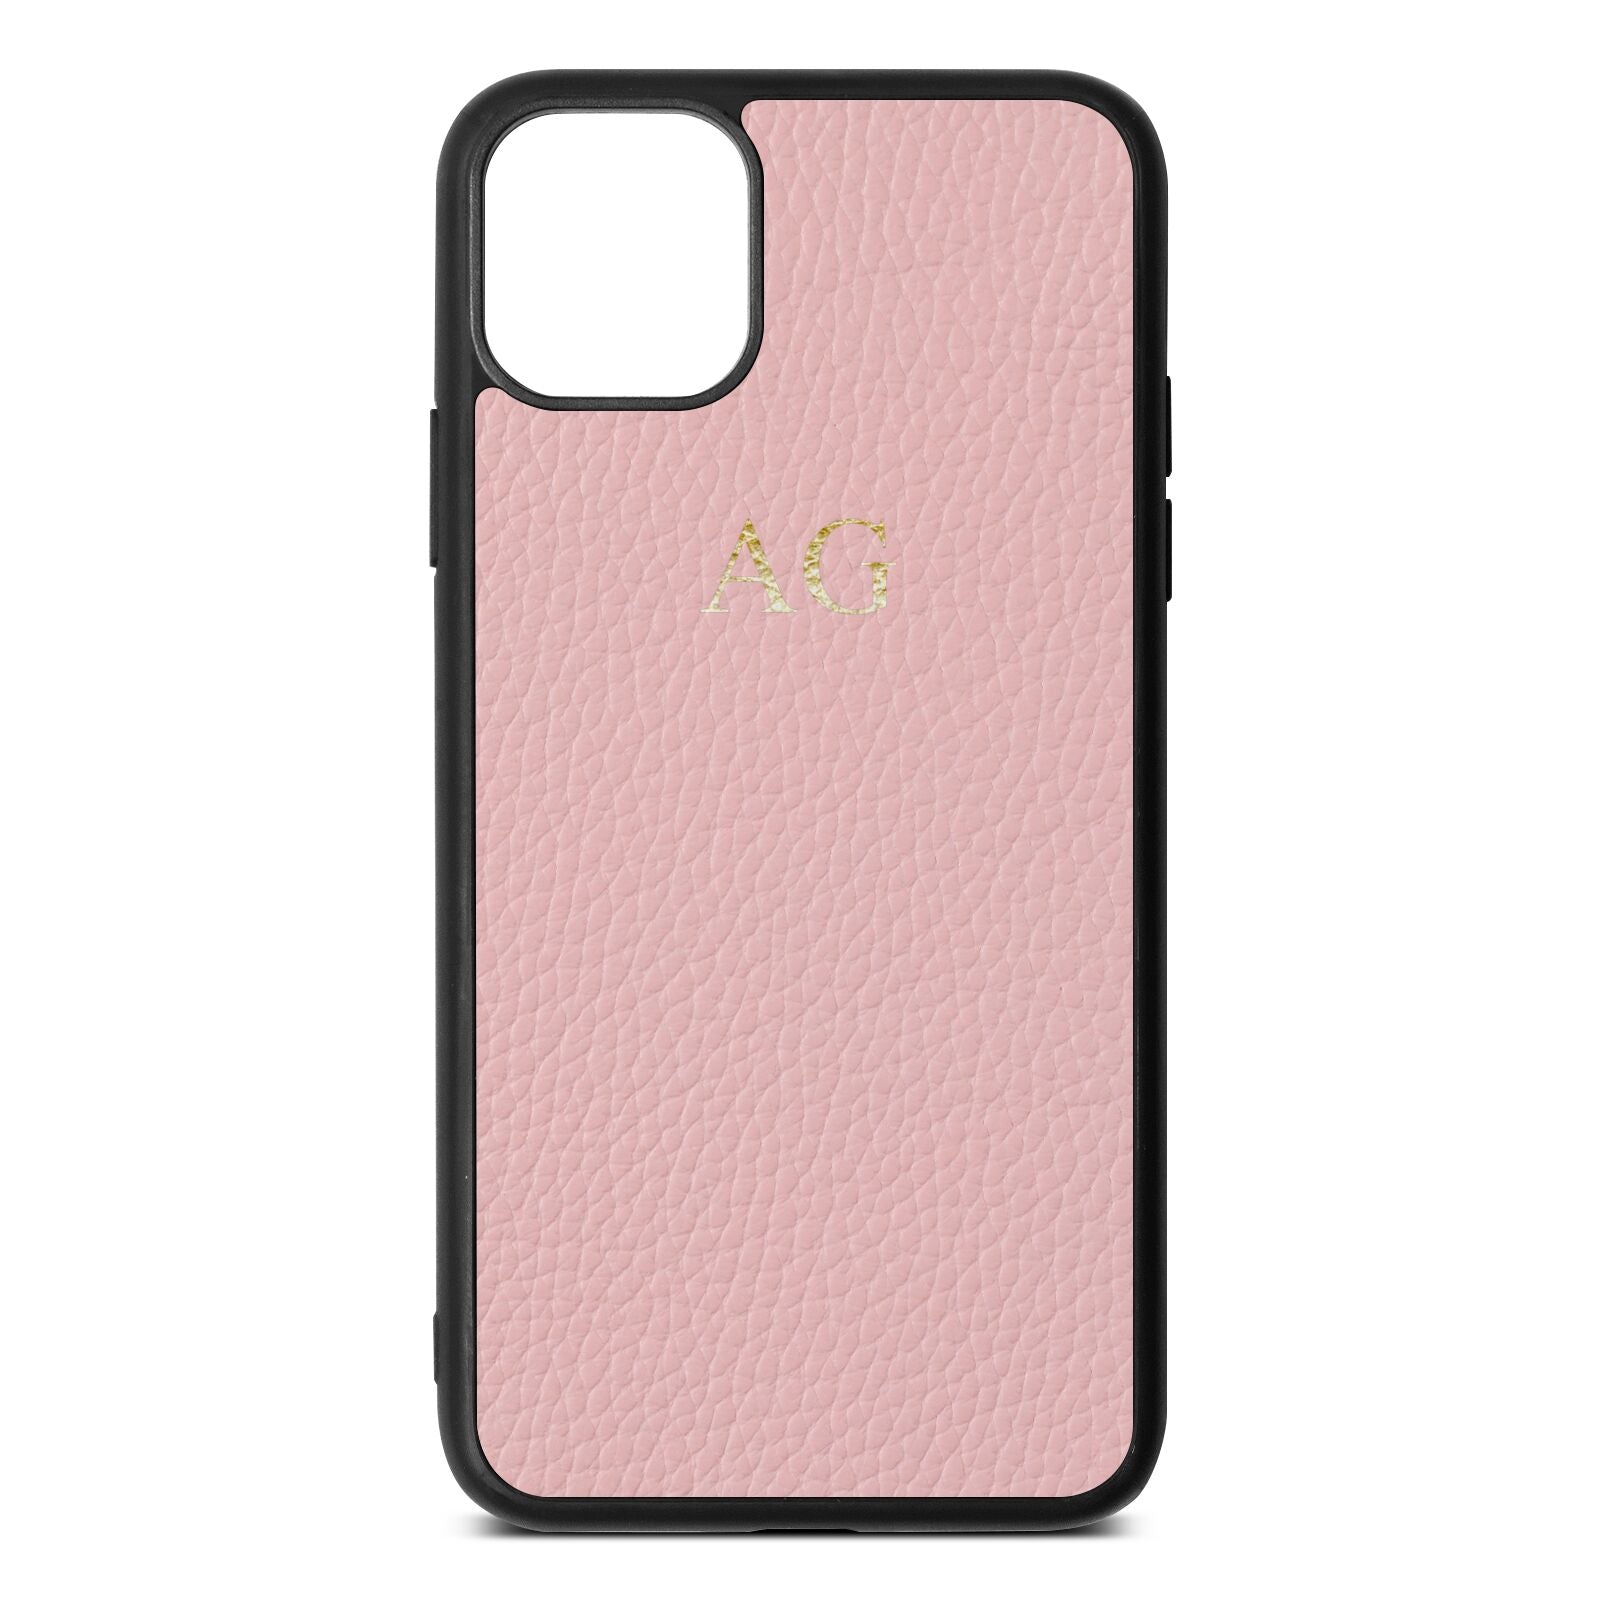 Personalised Pink Pebble Leather iPhone 11 Pro Max Case